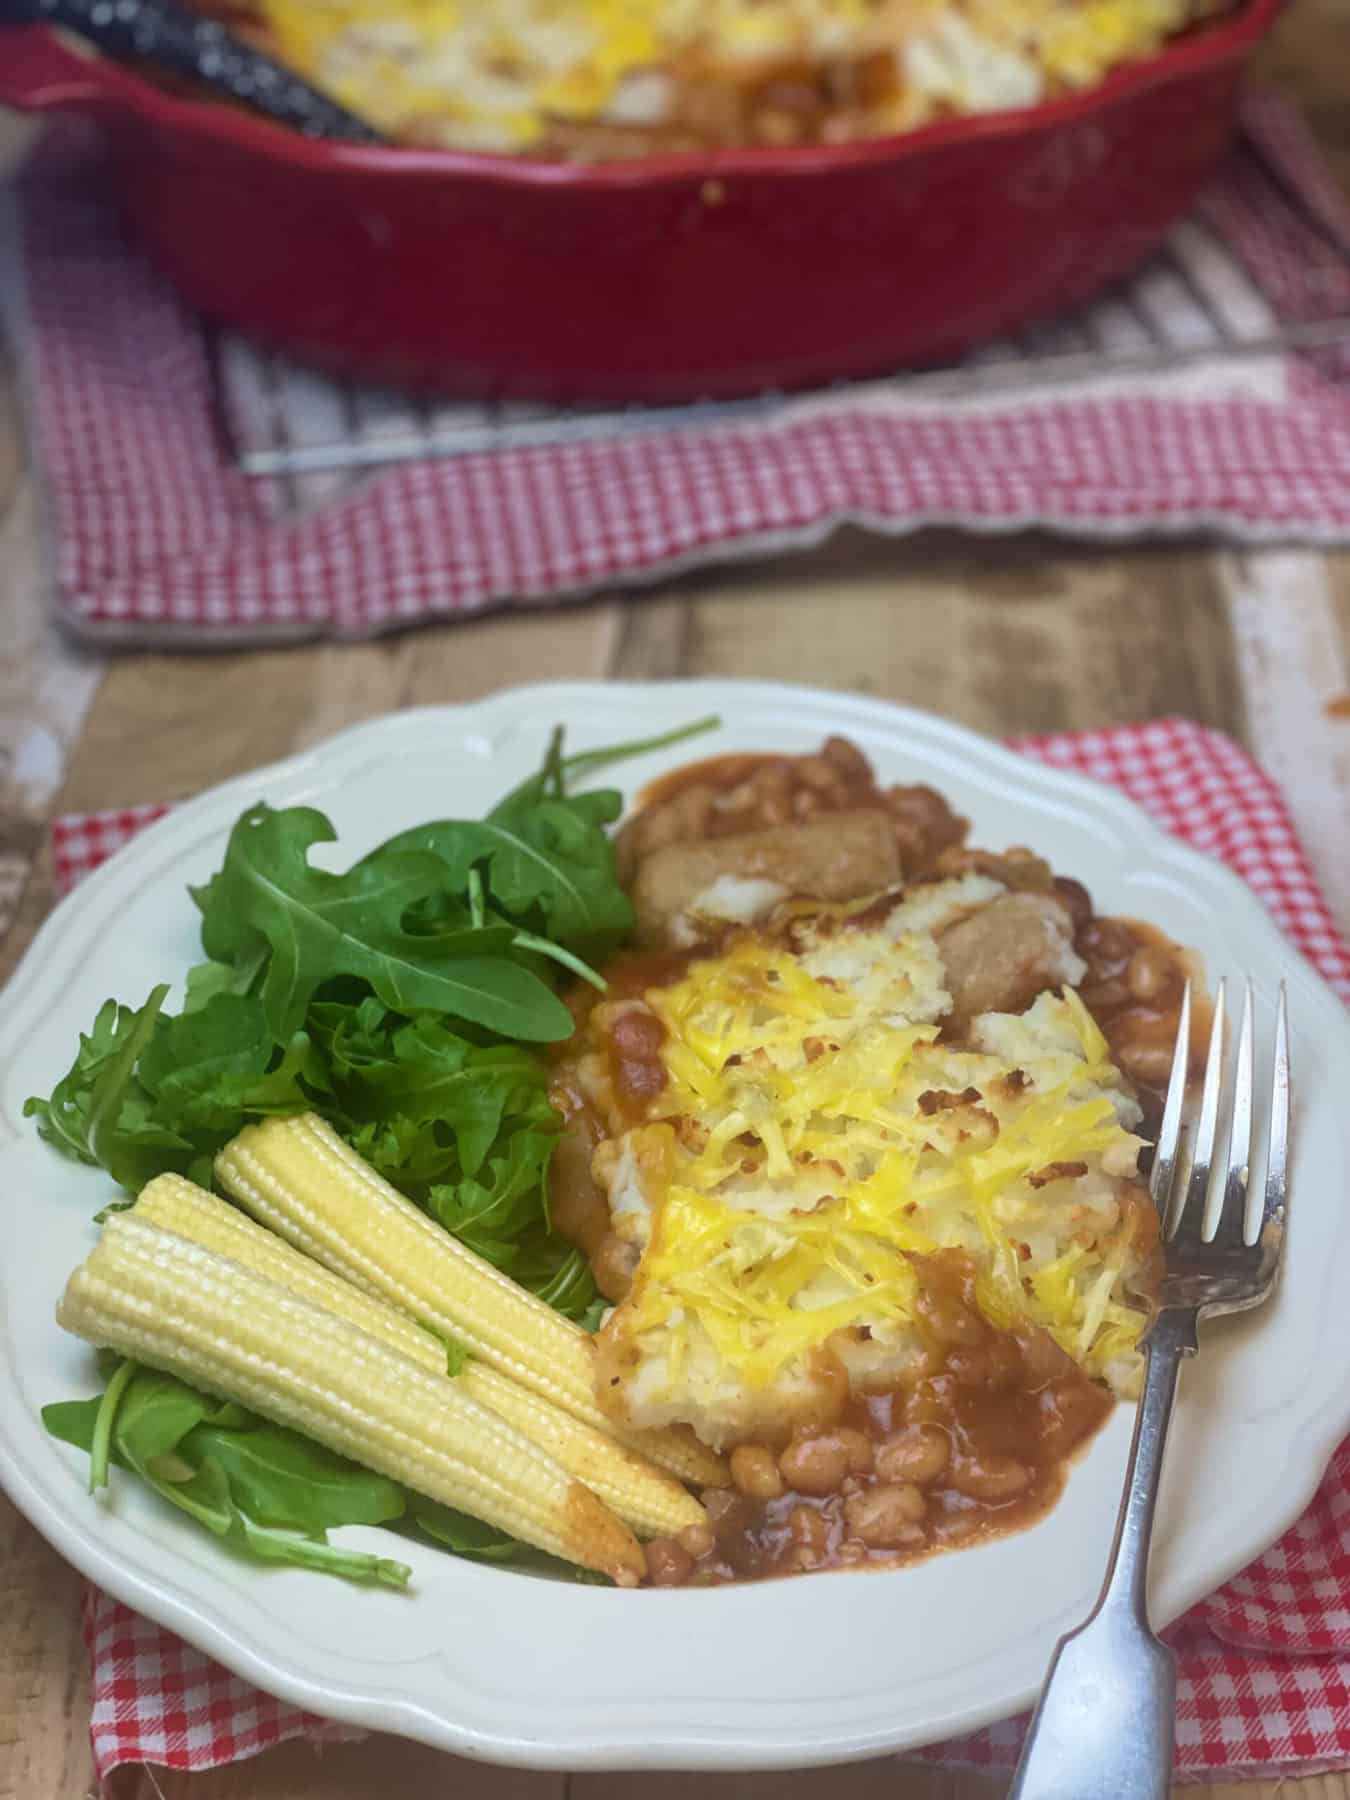 Vegan cowboy pie served with corn cobs and wild rocket in white bowl, silver fork, and red casserole dish in distance, red check tea towels.